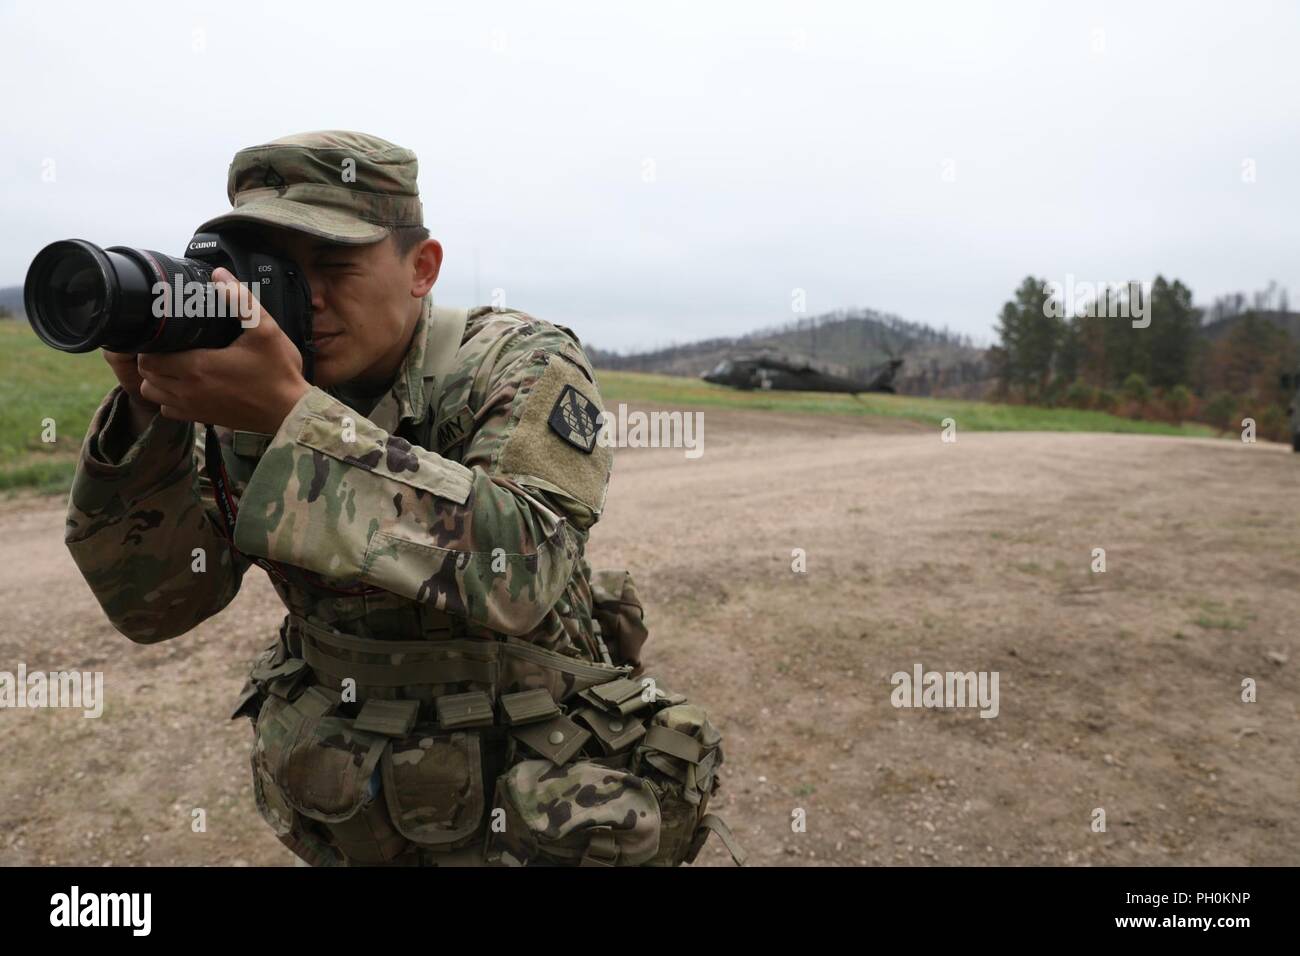 U.S. Army Pfc. James Smith documents a Mass Casualty training event in support of Golden Coyote, Custer State Park, S.D., June 16, 2018. The Golden Coyote exercise is a three-phase, scenario-driven exercise conducted in the Black Hills of South Dakota and Wyoming, which enables commanders to focus on mission essential task requirements, warrior tasks and battle drills. Stock Photo